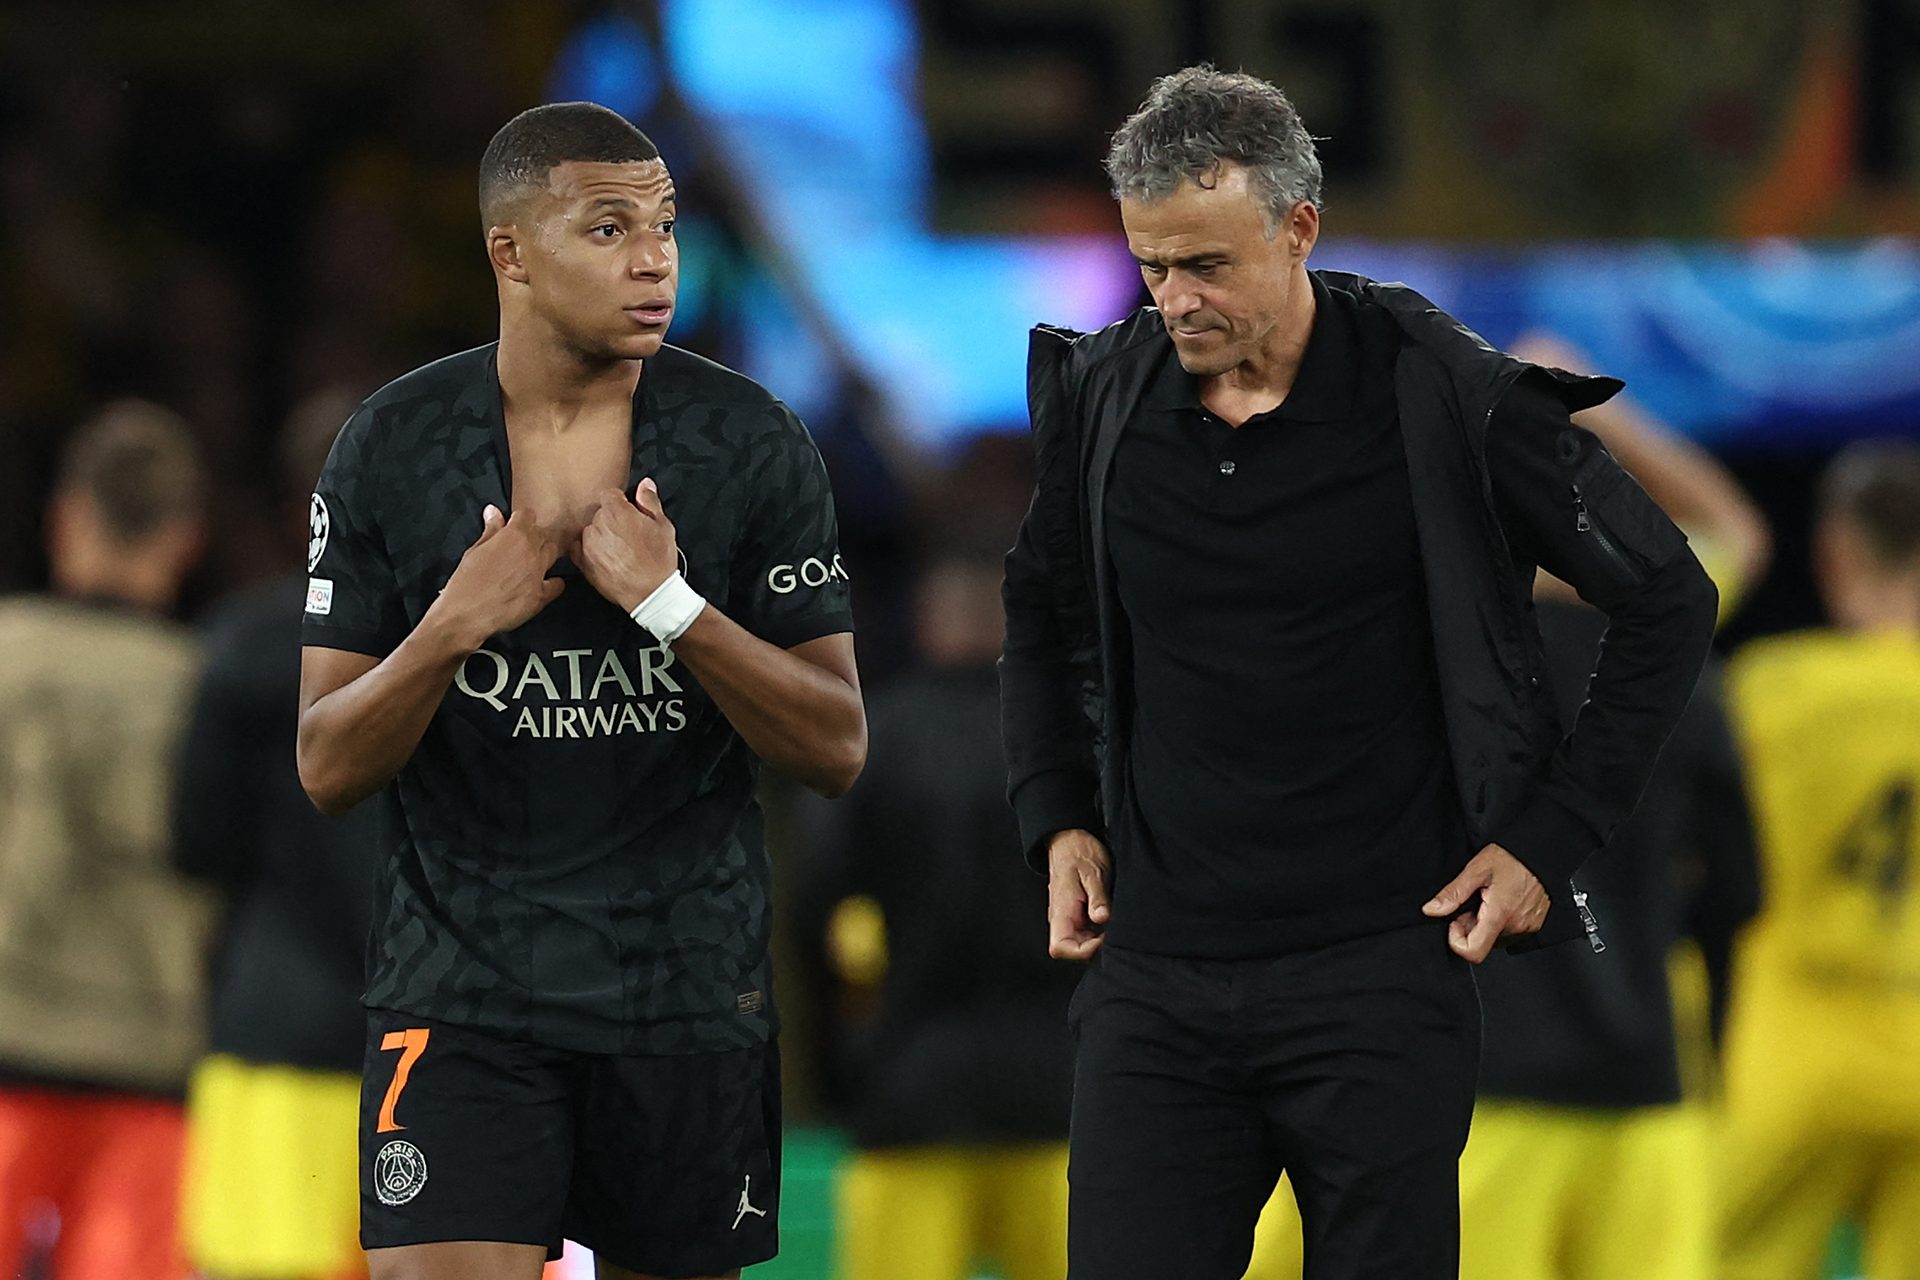 A complicated ending at PSG